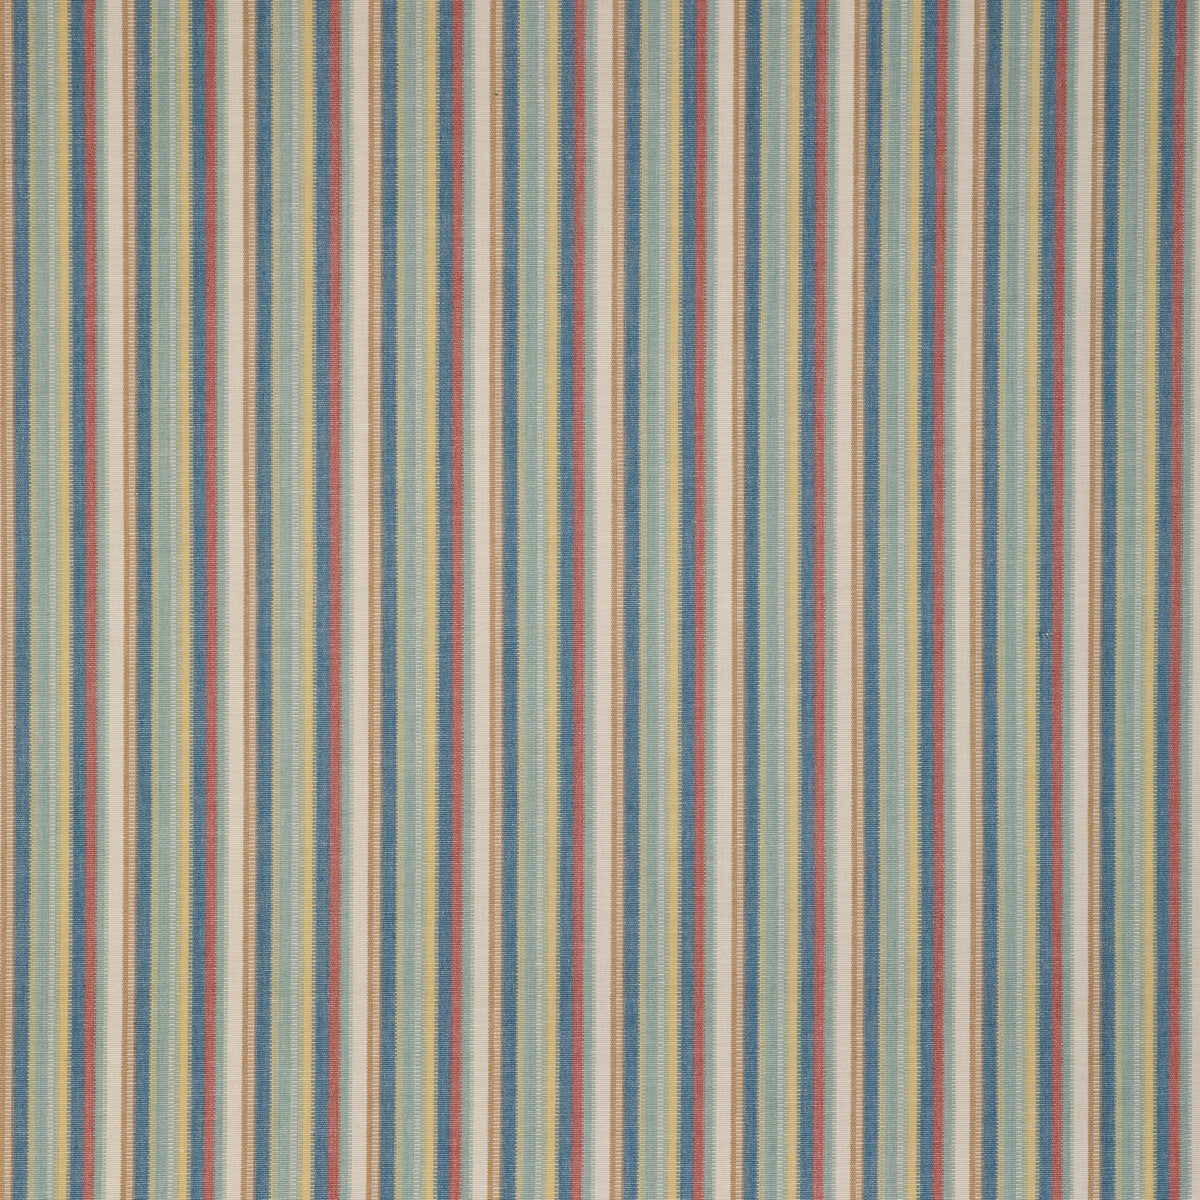 Sandbanks Stripe fabric in aqua/gold color - pattern 2023105.354.0 - by Lee Jofa in the Highfield Stripes And Plaids collection